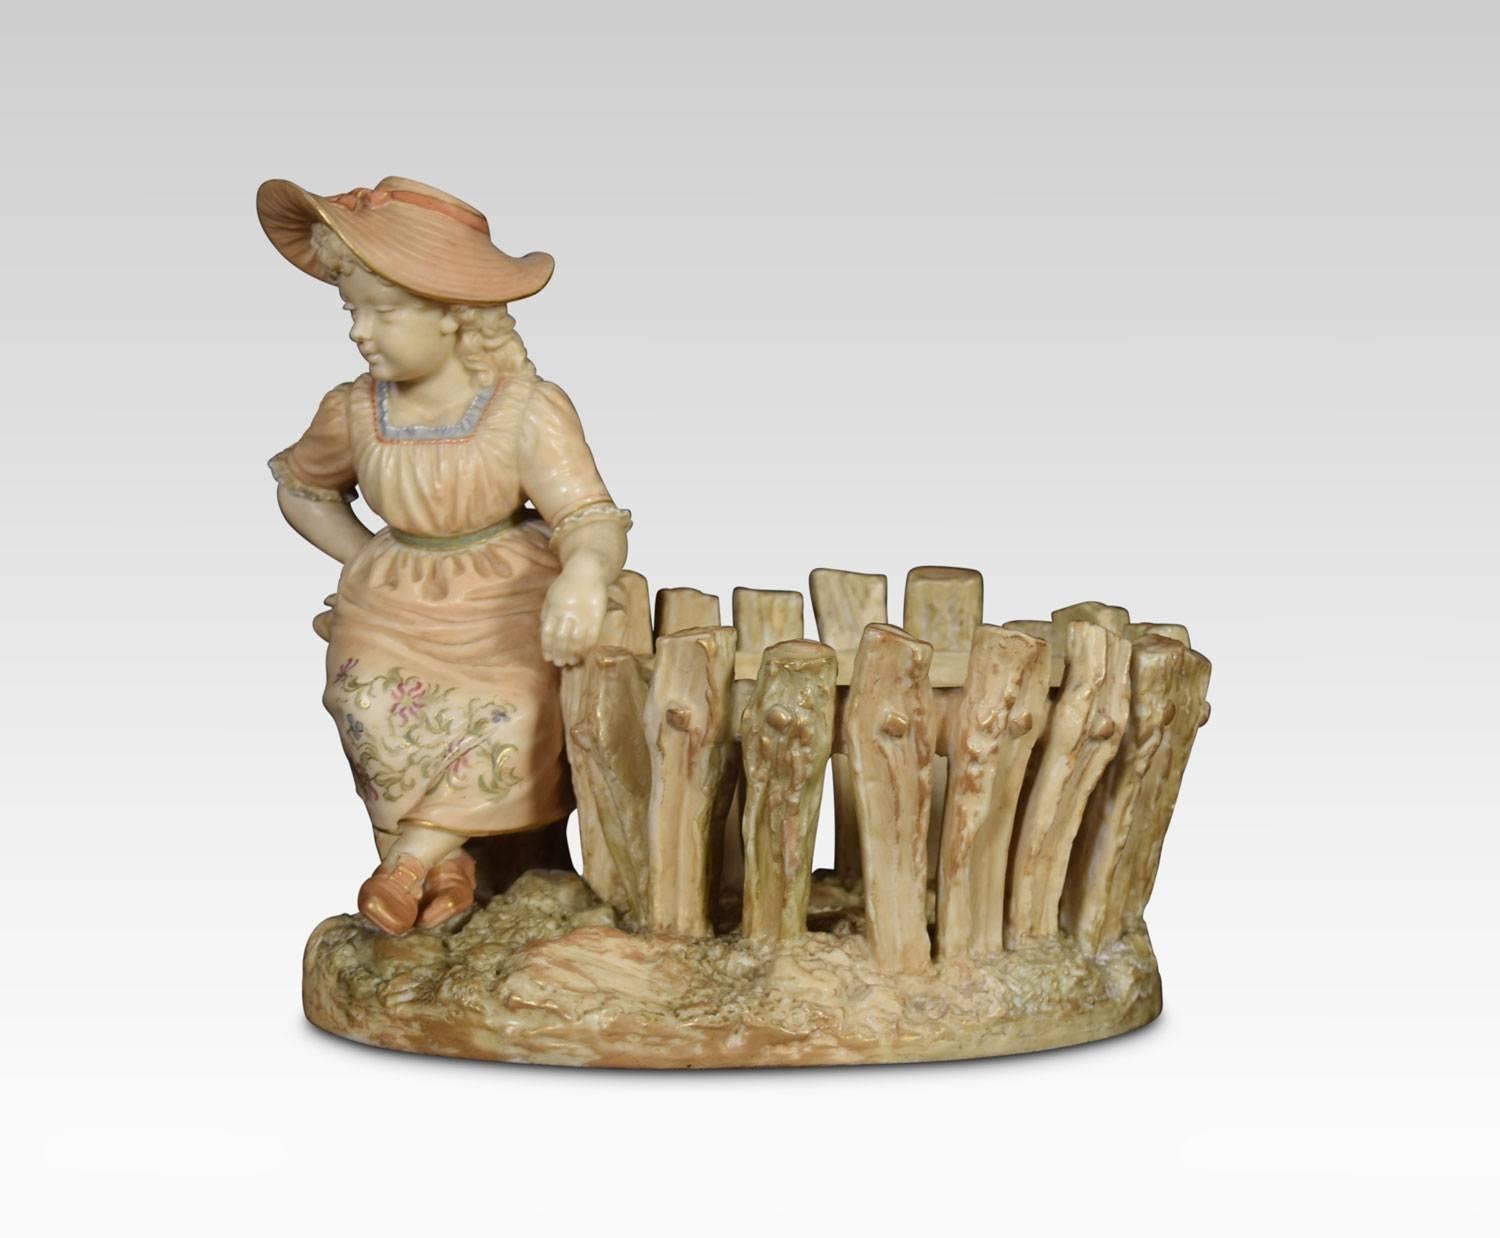 Royal Worcester Hadley figure depicting a young girl leaning on a fence.
Dimensions:
Height 7 inches
Width 7.5 inches
Depth 6 inches.